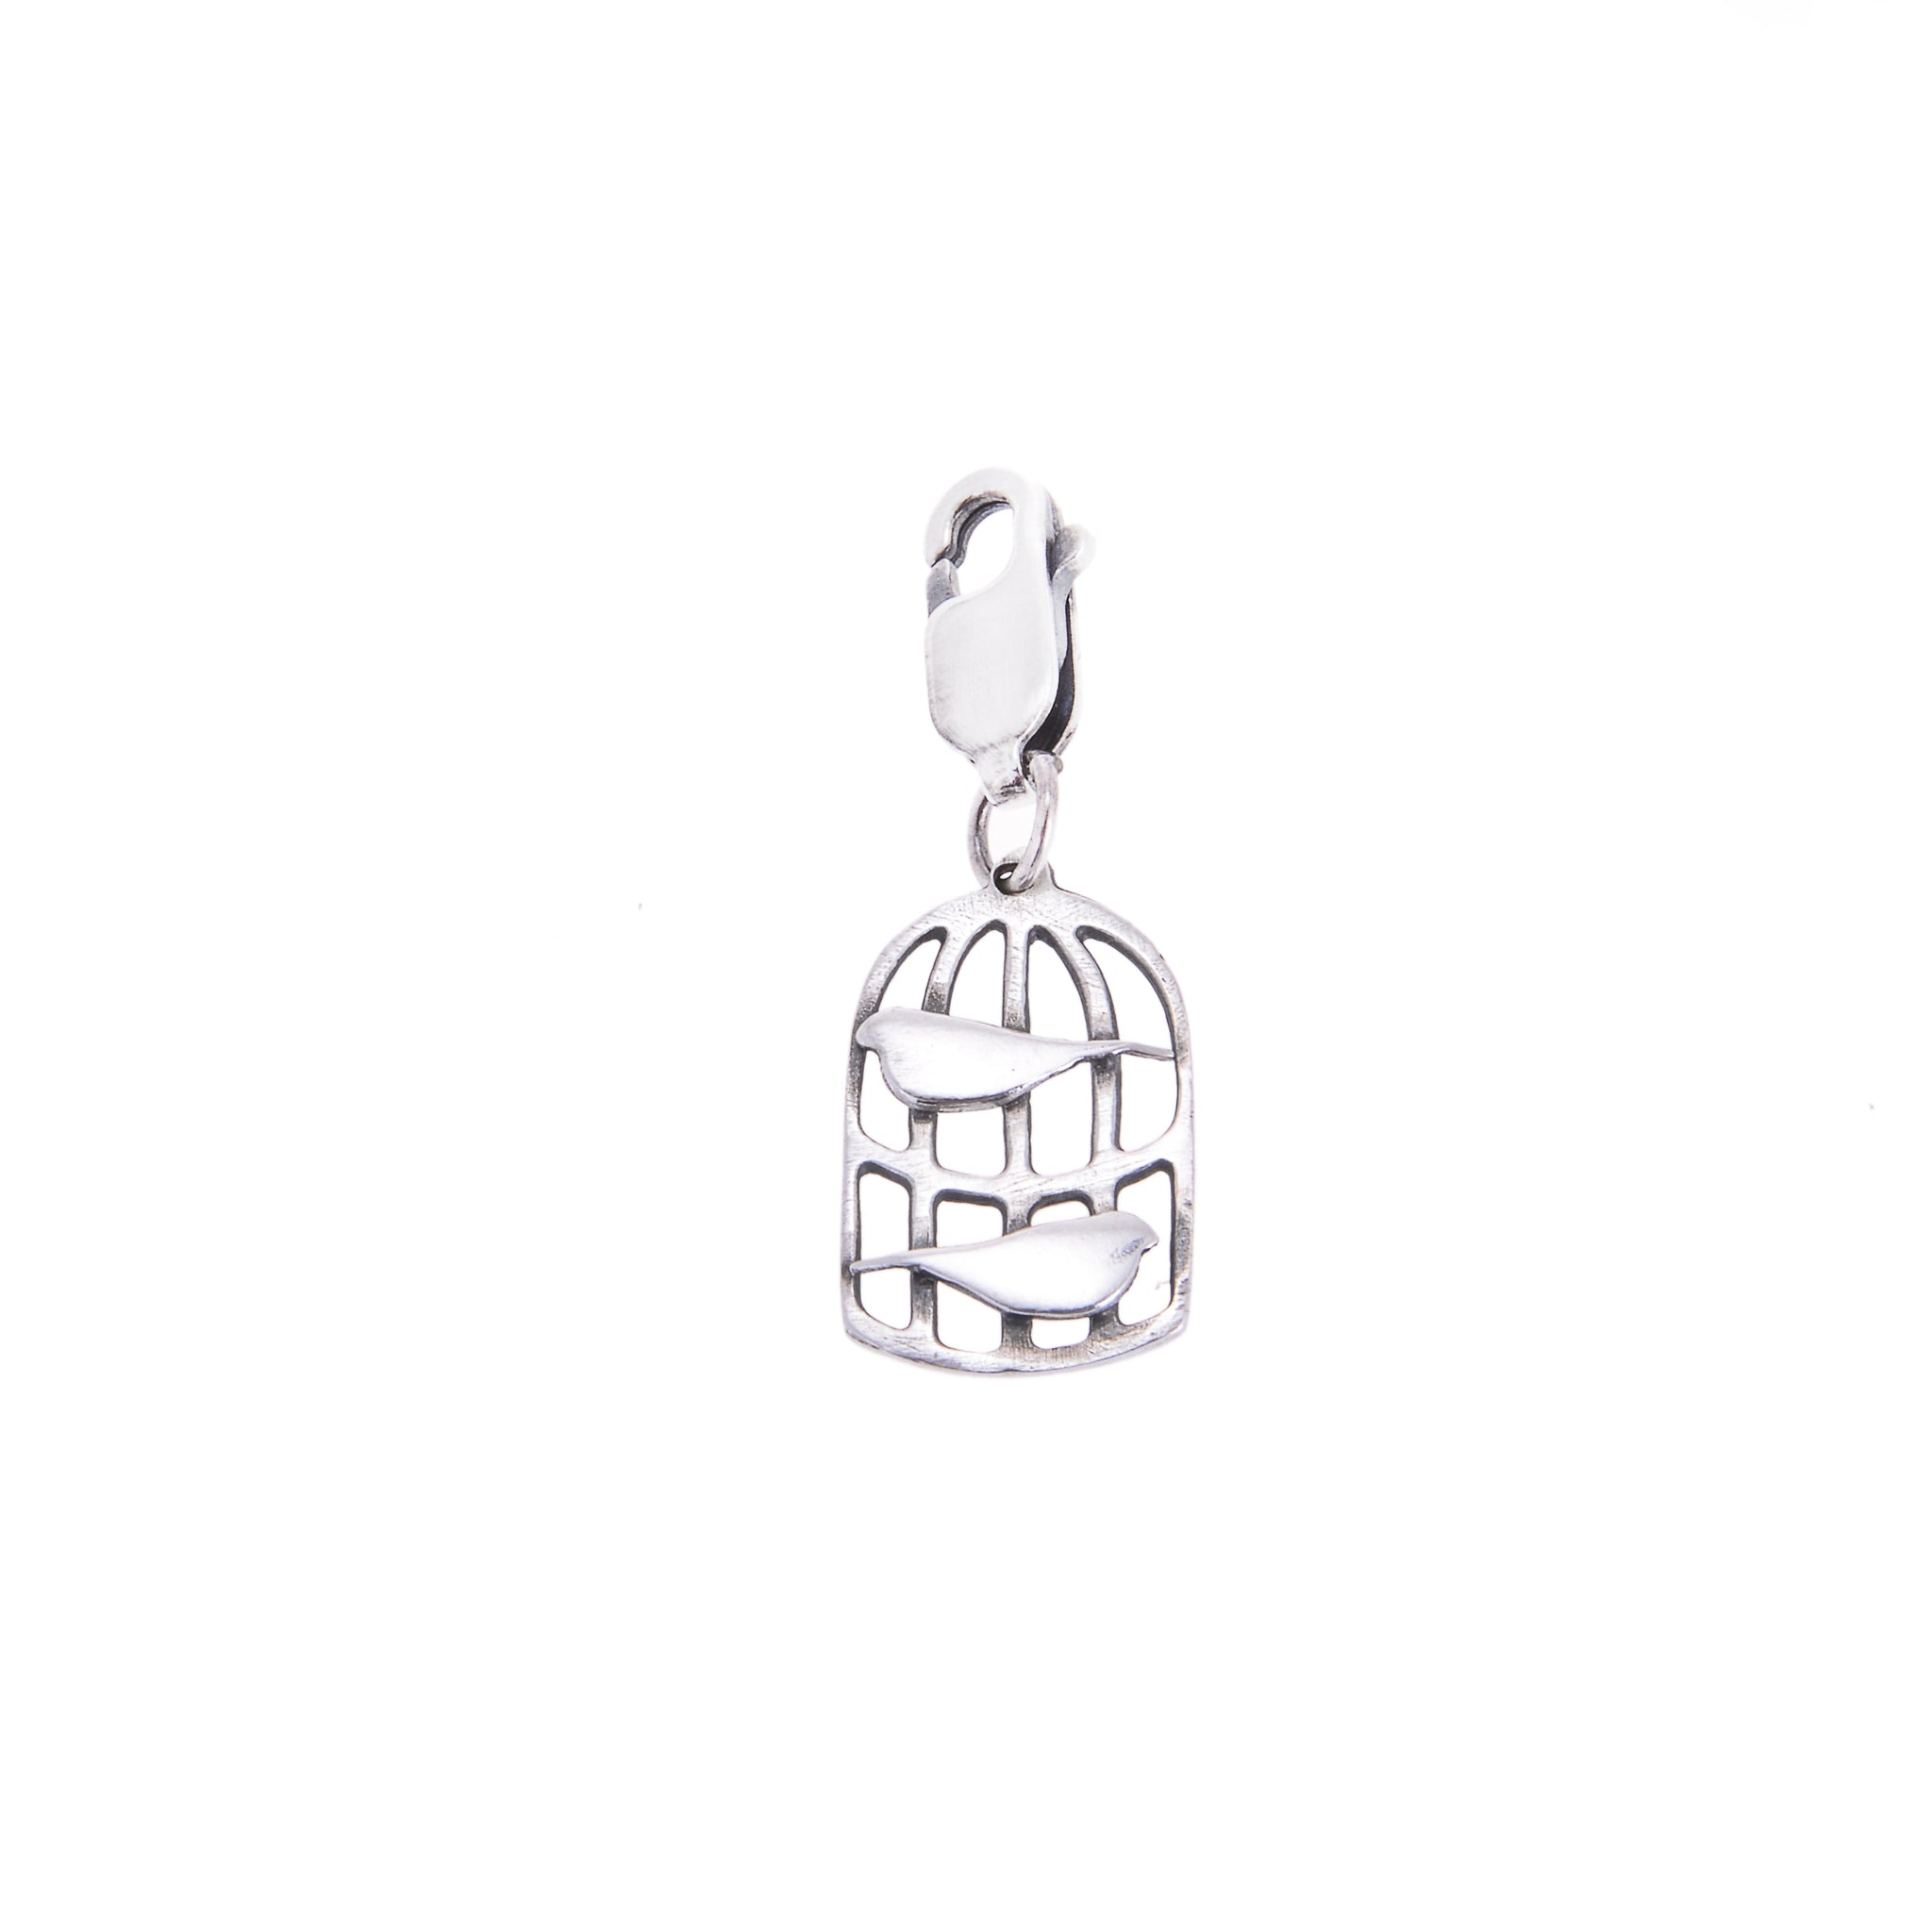 Small Silver birdcage charm with two silver birds and lobster clasp fitting, Kate Wimbush Jewellery